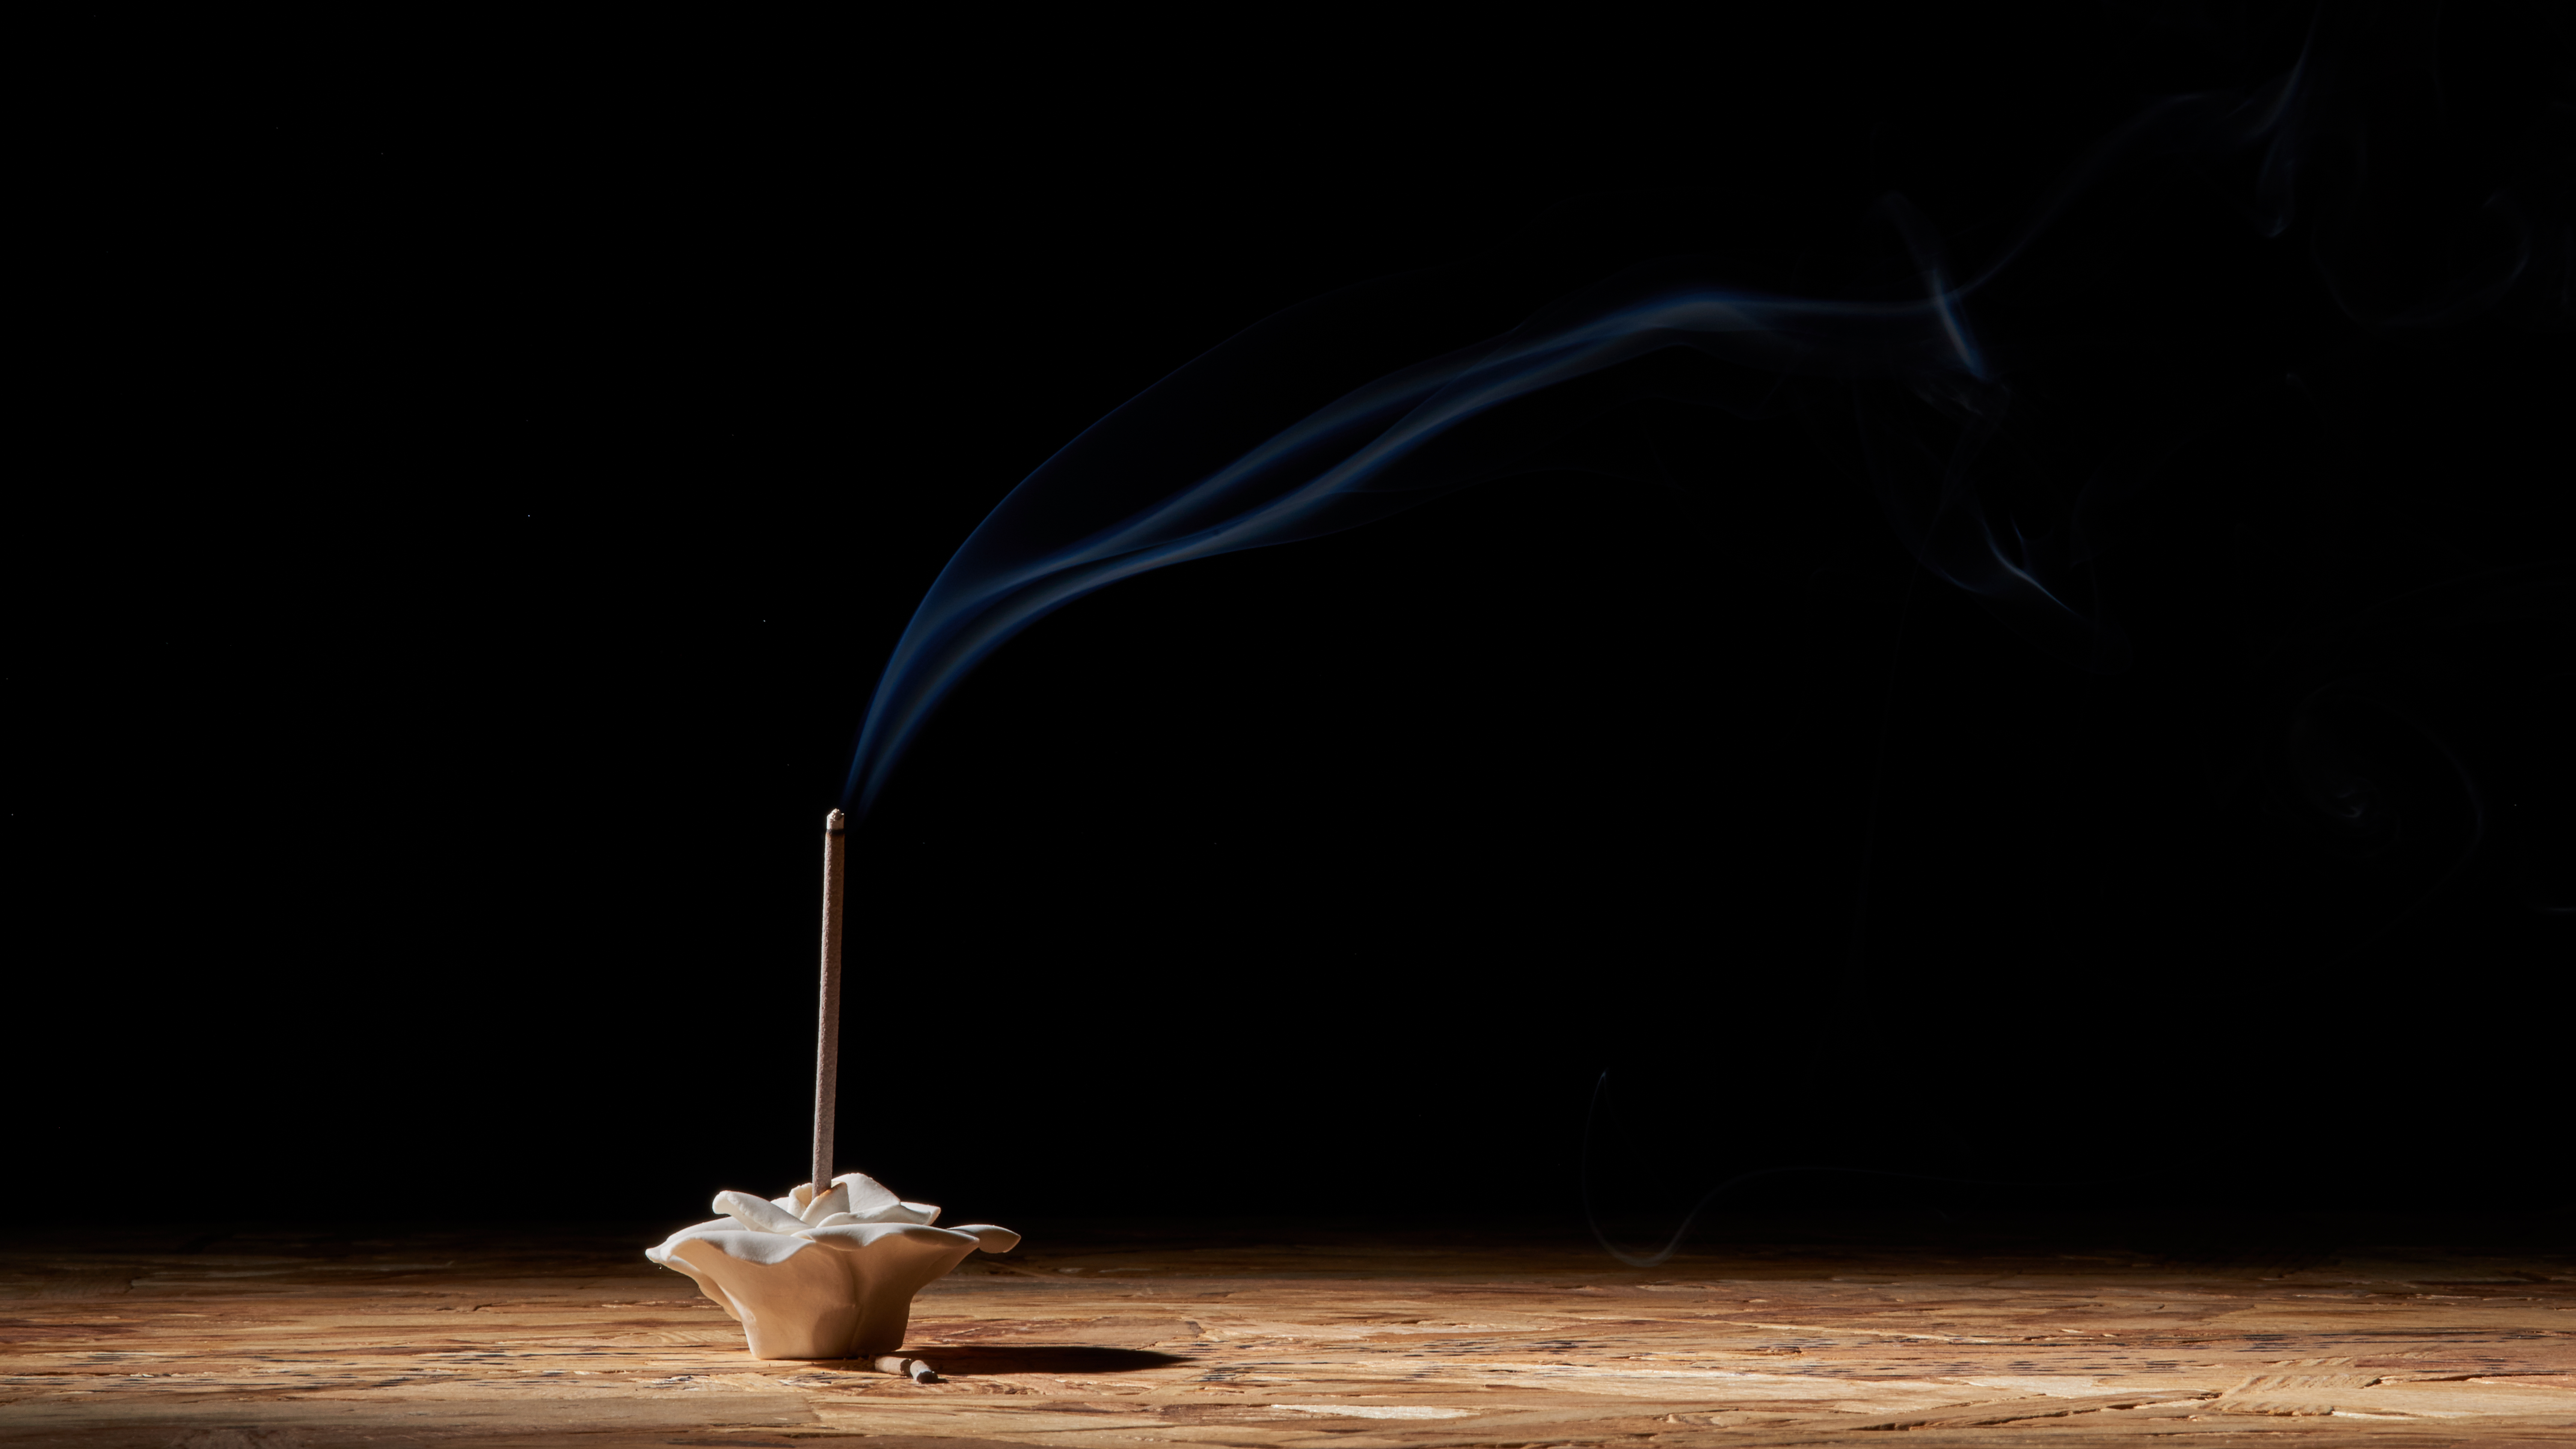 Simple Simple Background Wood Incense 6860x3859